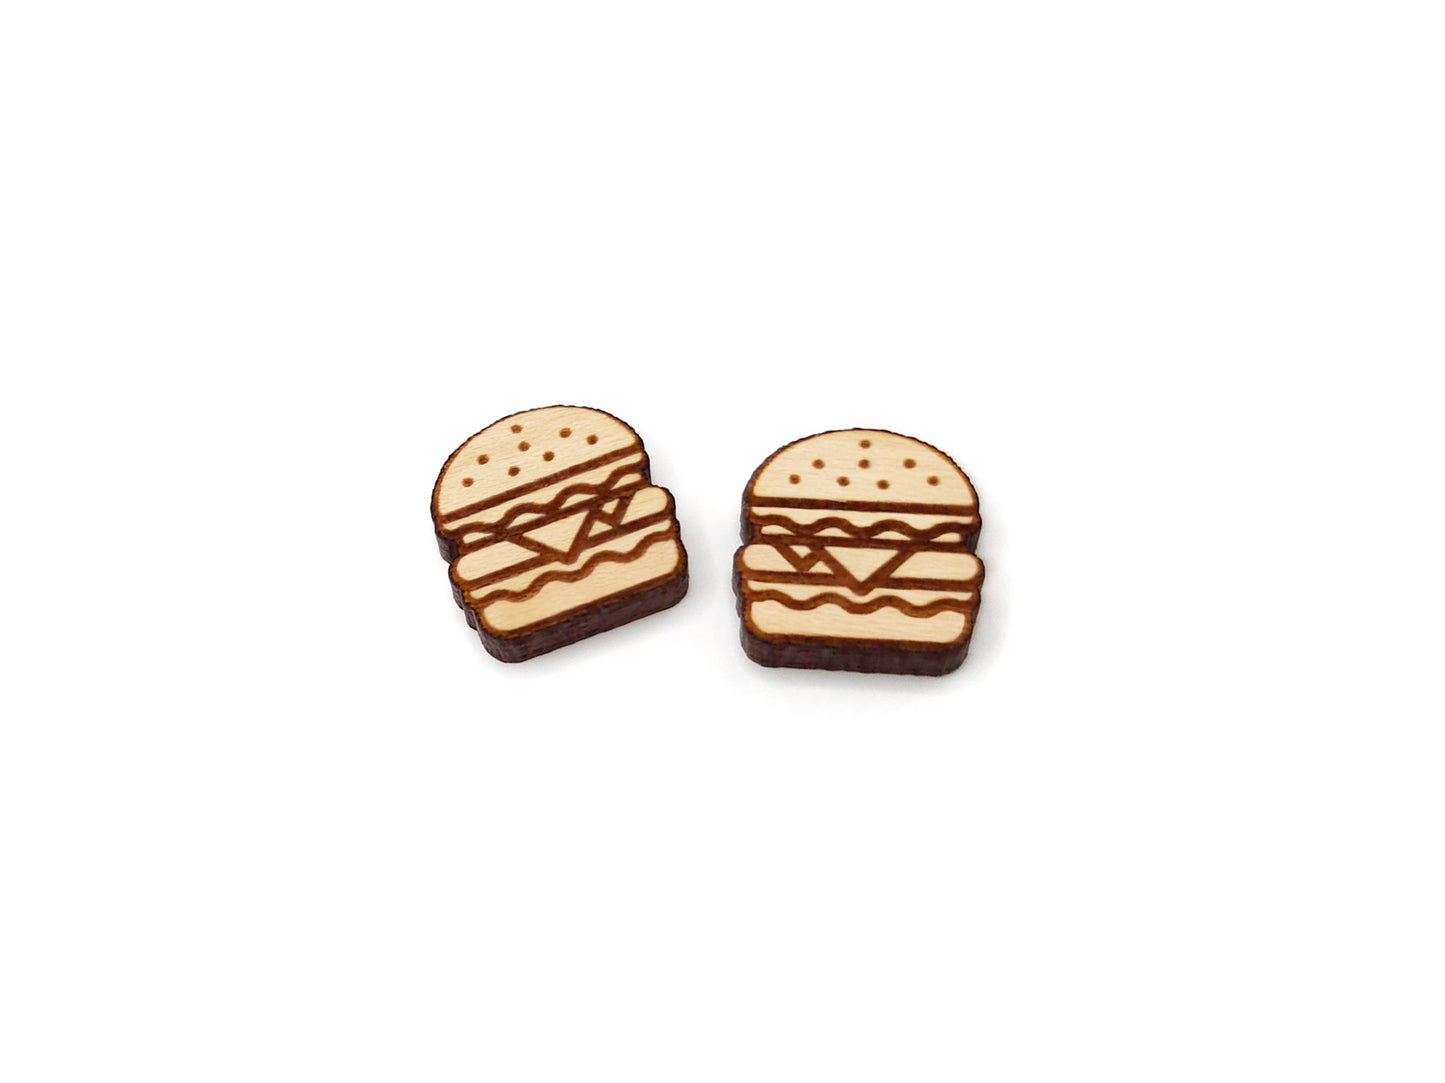 a pair of wooden cabochon stud earring blanks cut and engraved to look like a cheeseburger